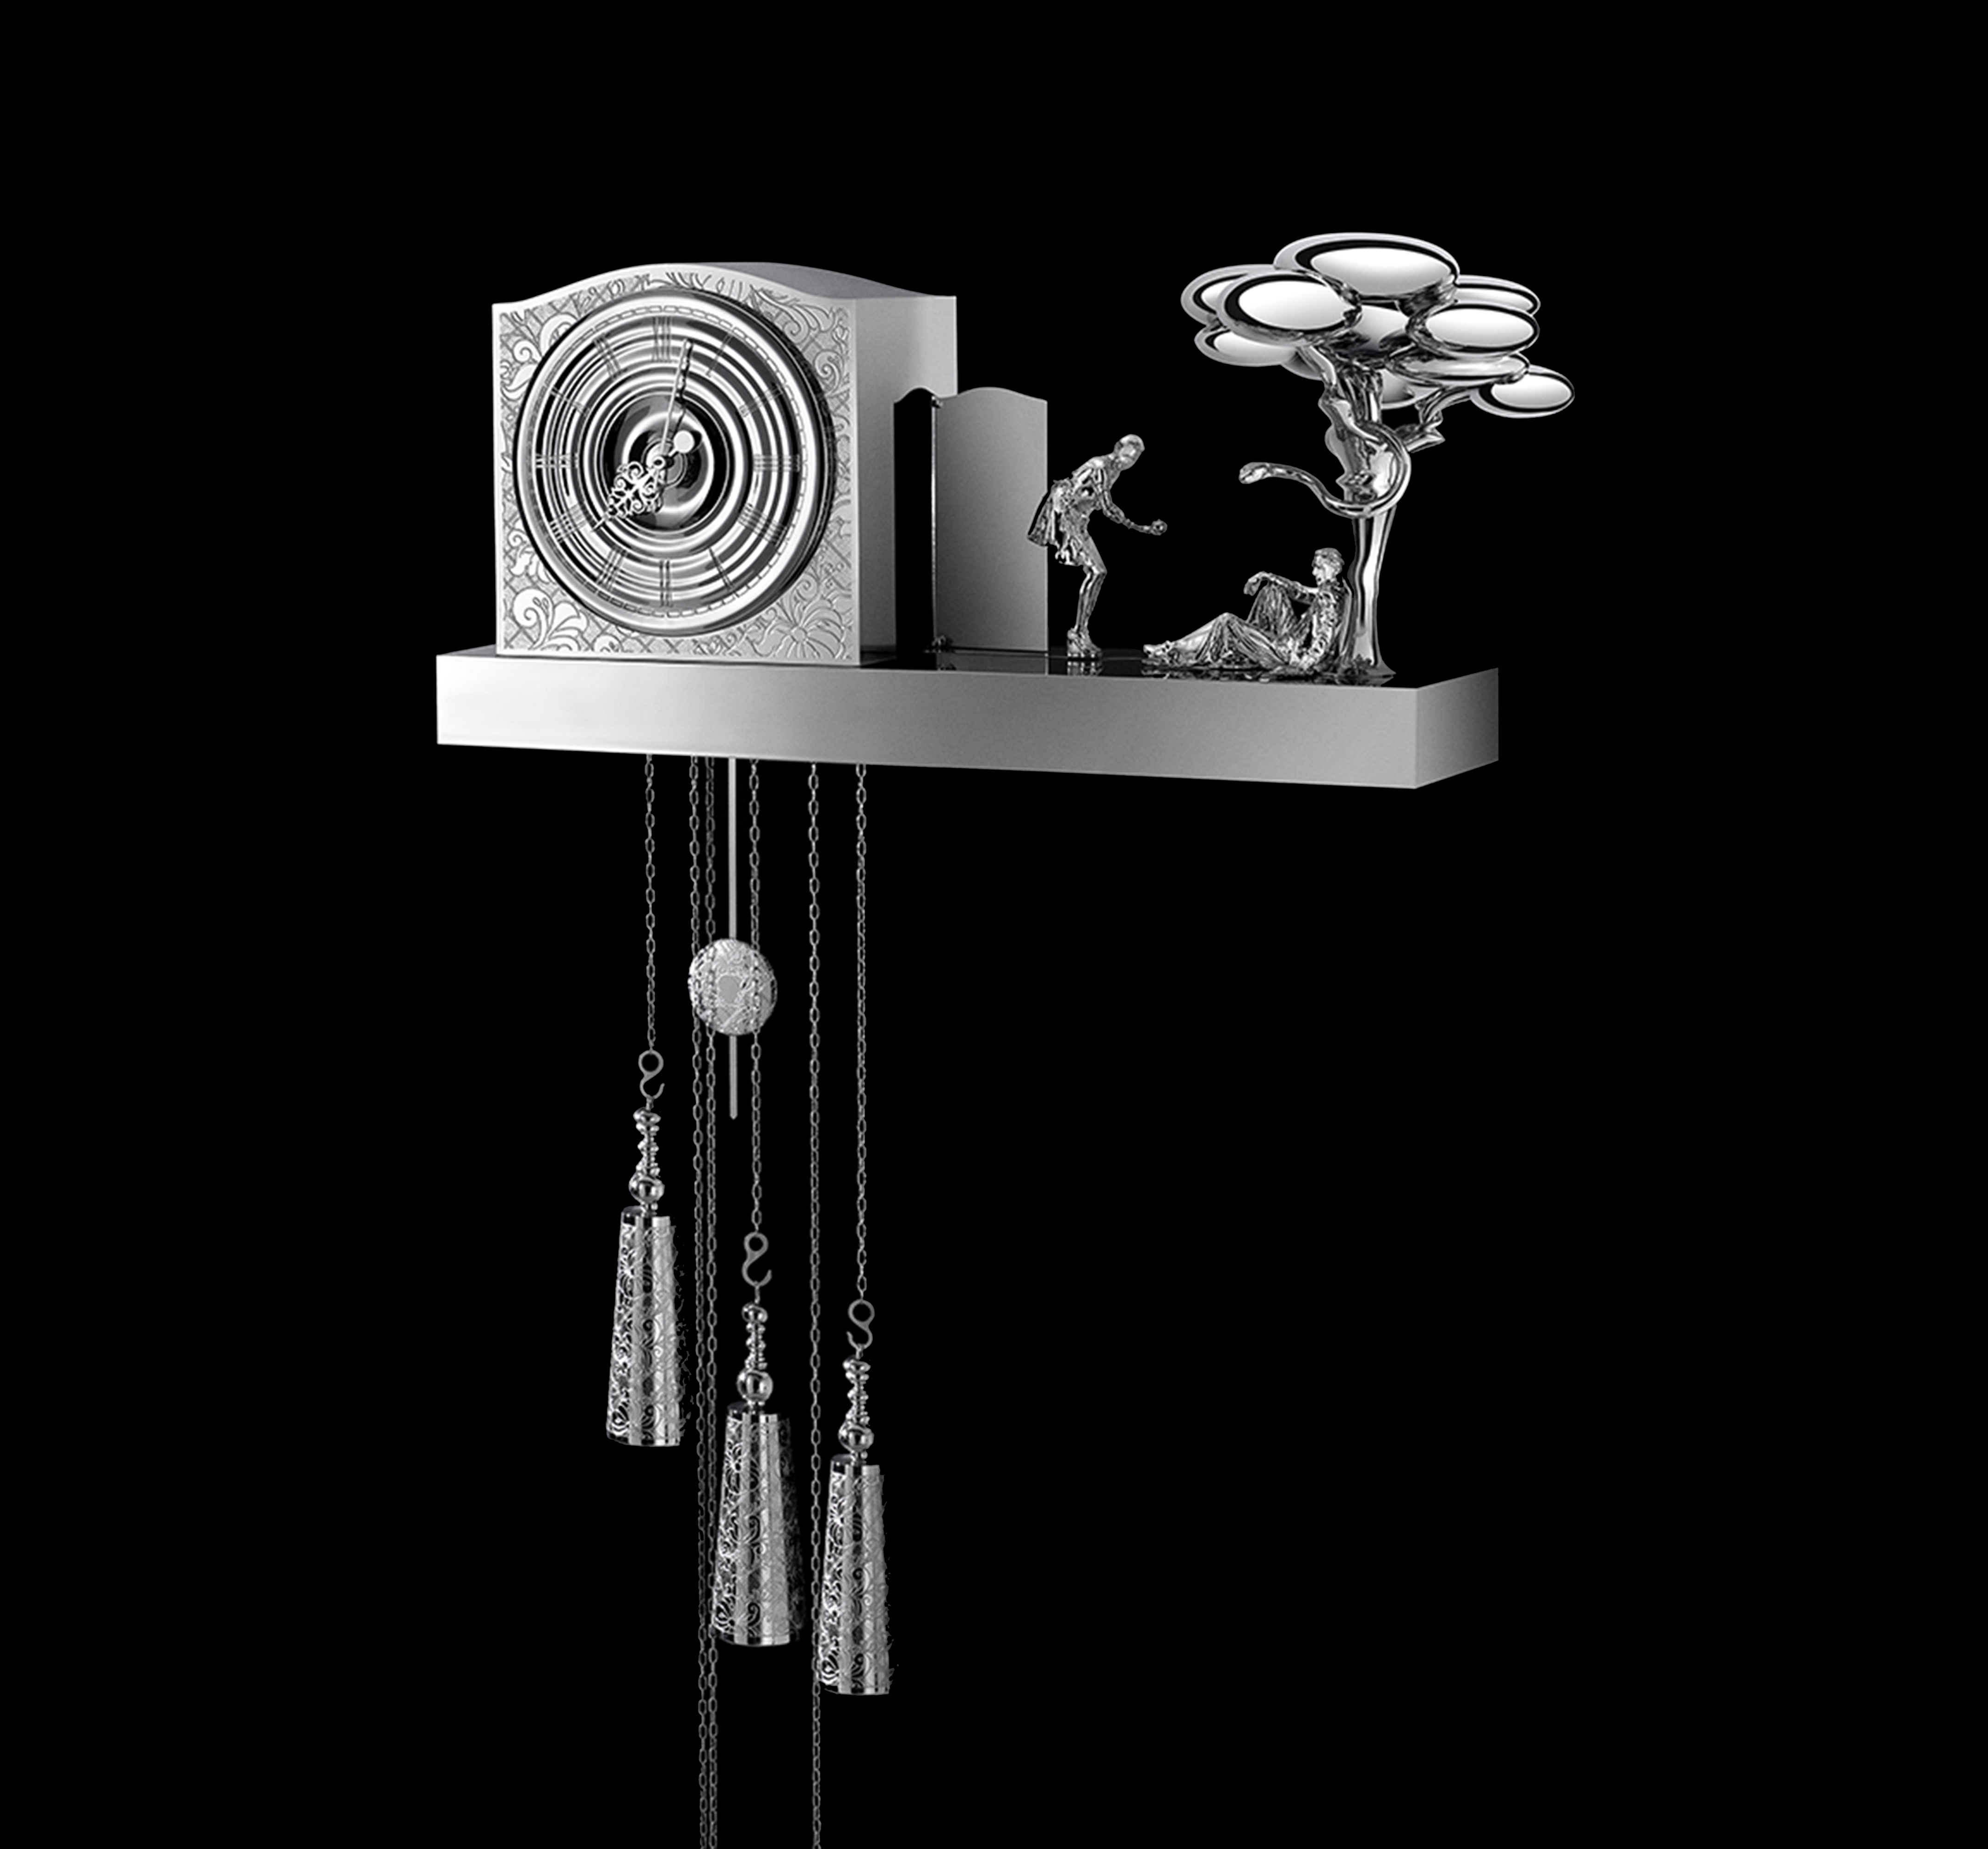 Christofle Available at Emery Studio Unveils the Jardin & Eden Stainless Steel Cuckoo Clock